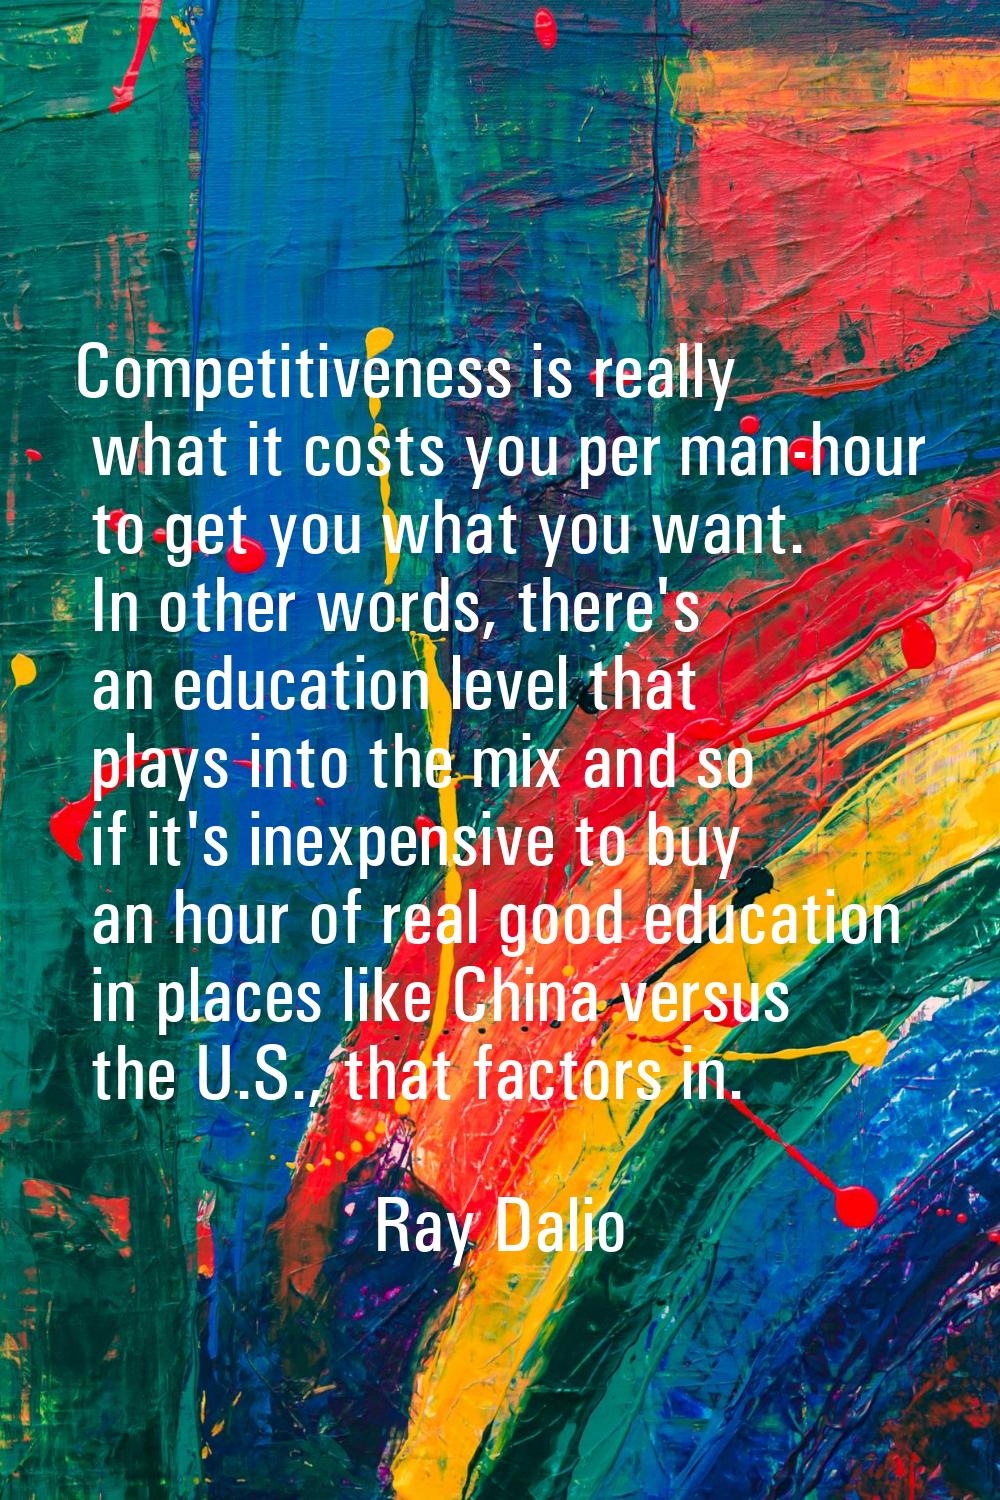 Competitiveness is really what it costs you per man-hour to get you what you want. In other words, 